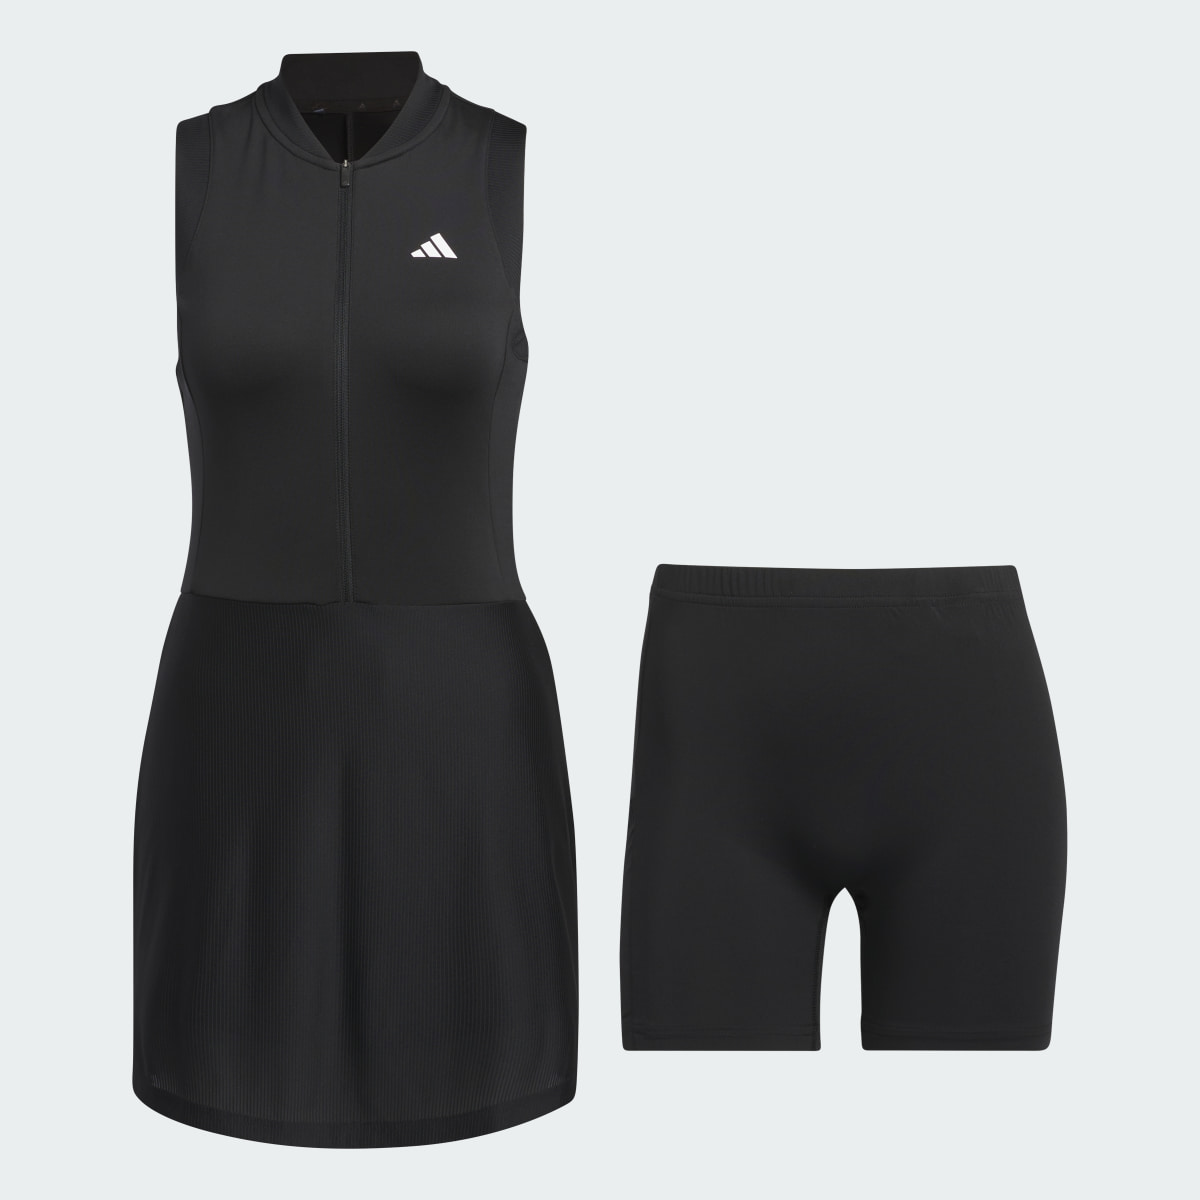 Adidas Robe sans manches Ultimate365 Femmes. 5